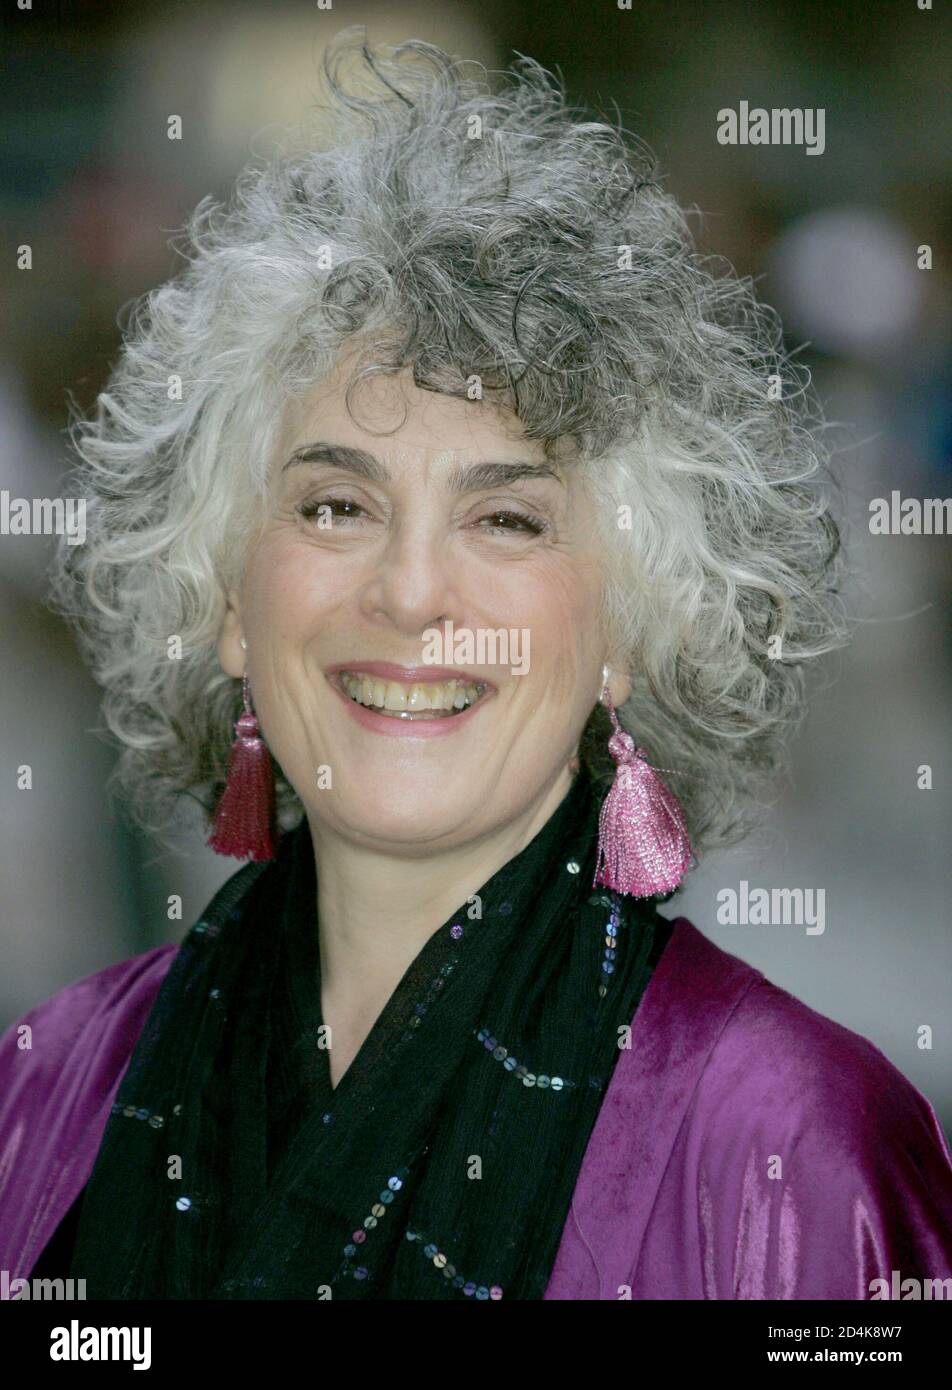 British Actress Eleanor Bron Arrives For The Uk Premiere Of The Film Wimbledon At The Empire Leicester Square In London September 04 Reuters Russell Boyce Rus Md Stock Photo Alamy